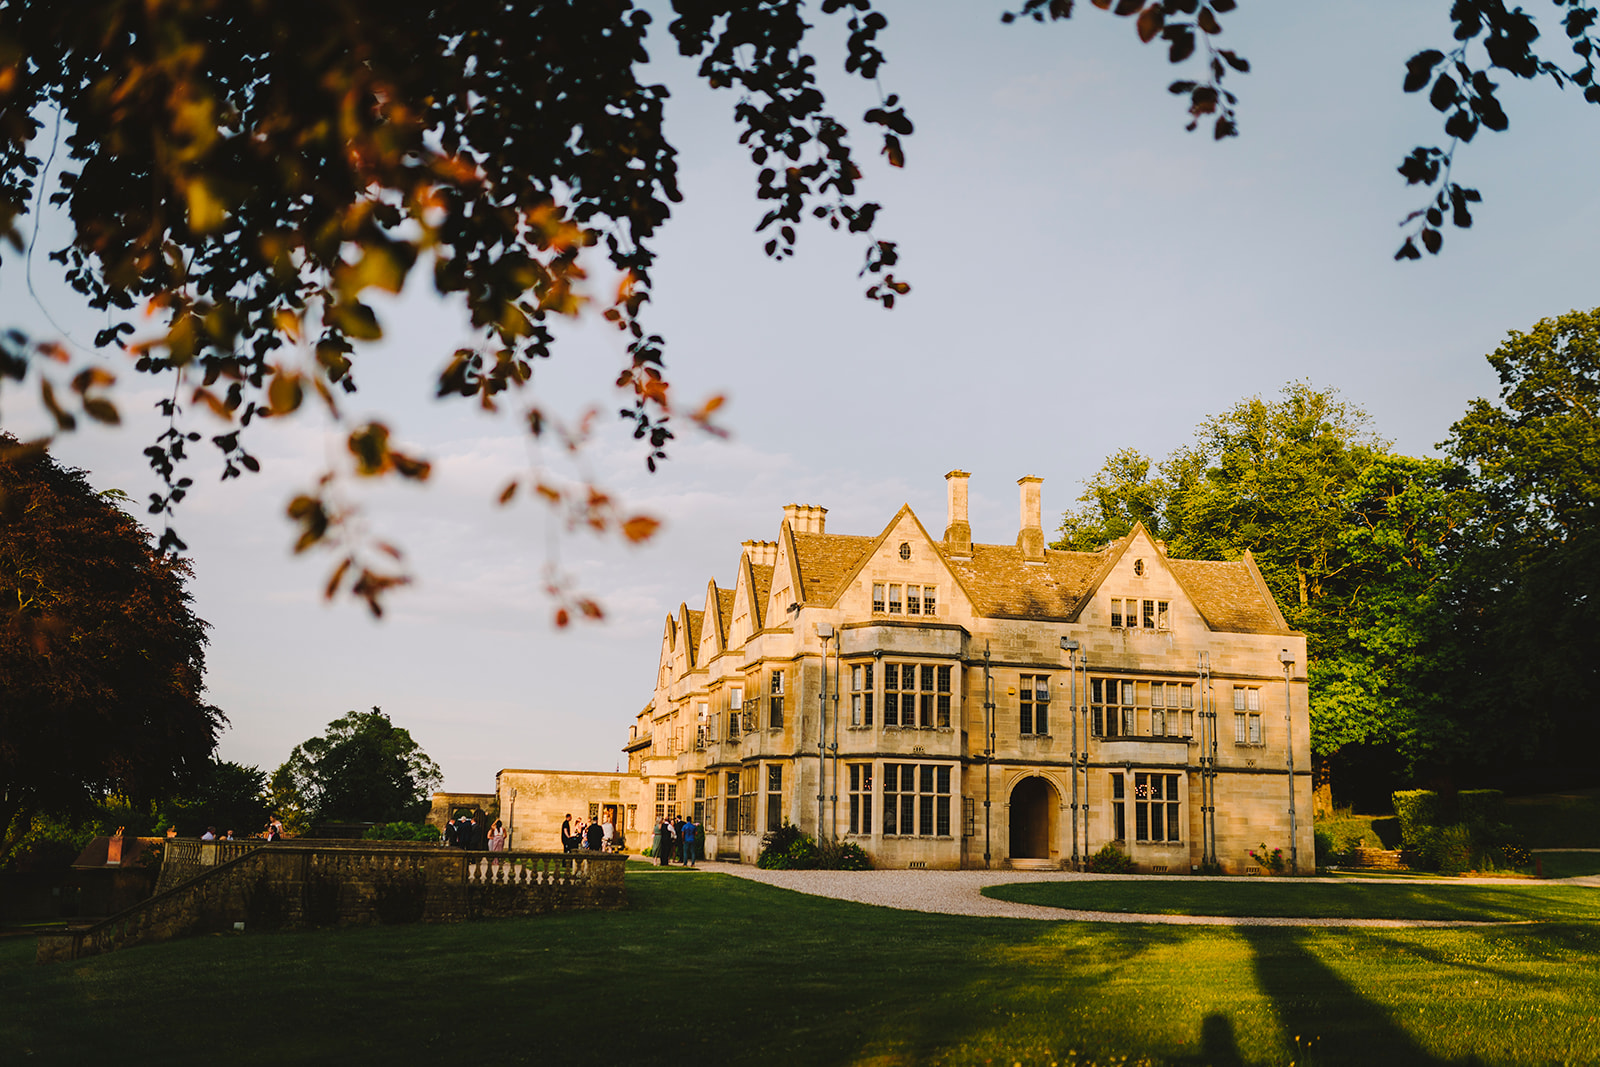 Coombe Lodge, a large mansion situated in the middle of a grassy field, offers an enchanting backdrop for couples looking to capture their special moments with a talented Bristol wedding photographer.